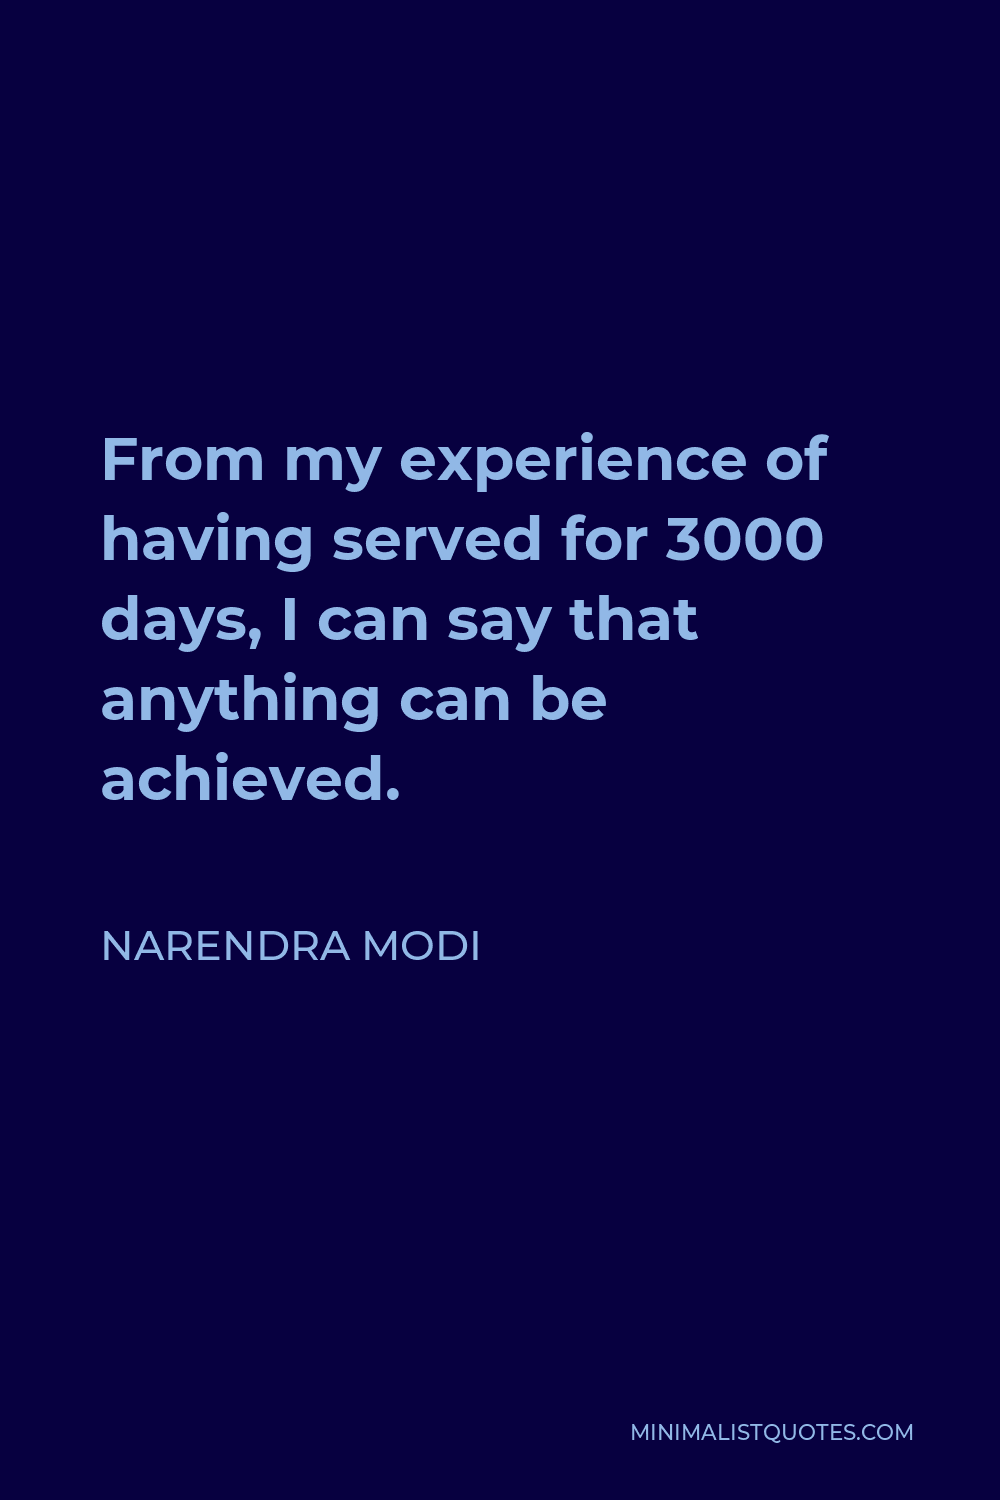 Narendra Modi Quote - From my experience of having served for 3000 days, I can say that anything can be achieved.